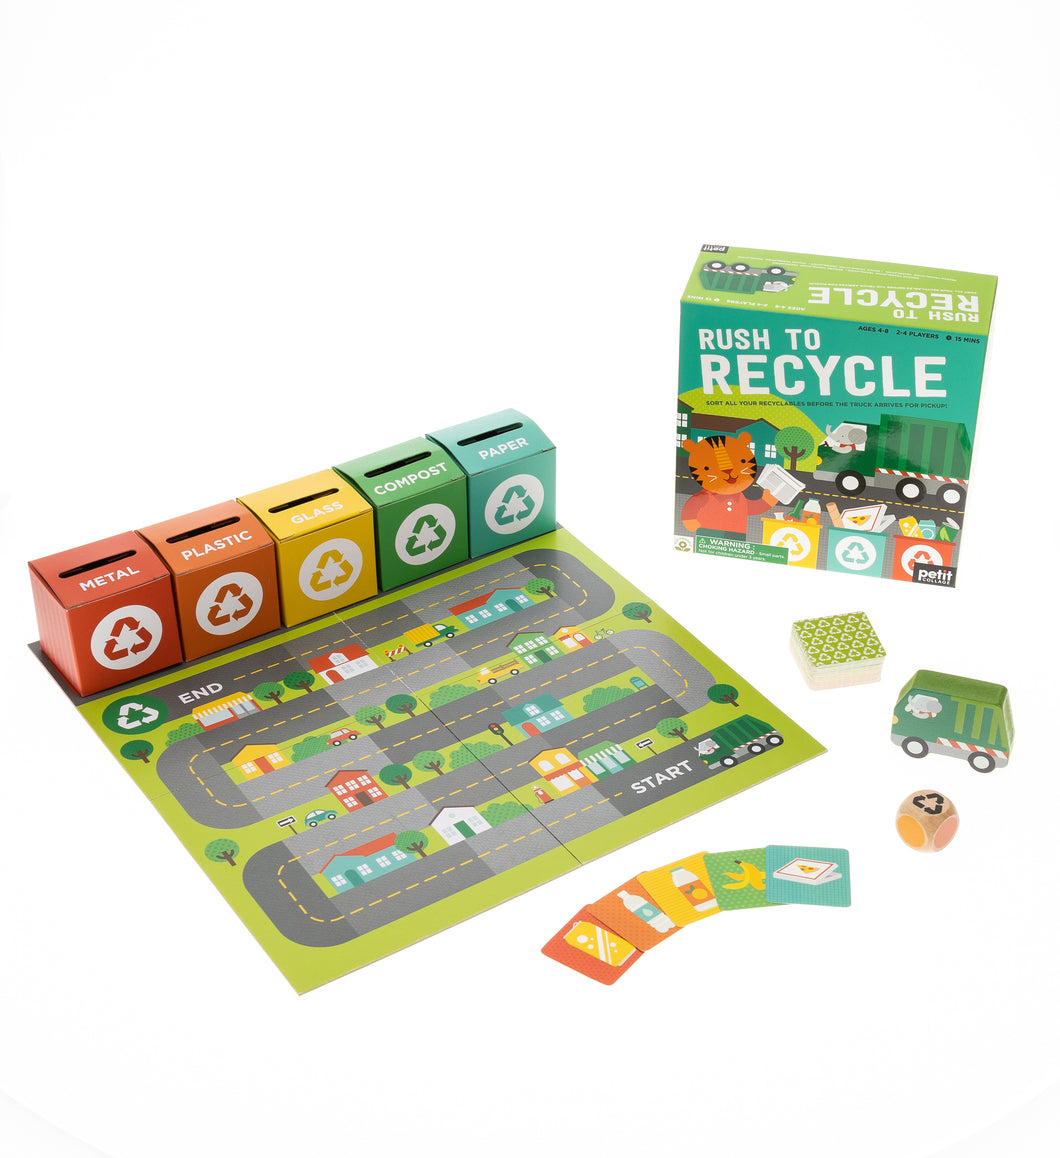 Play board is laid out with cards, dice, recycling truck and card recycling bins. Rush to Recycle box sits in background.